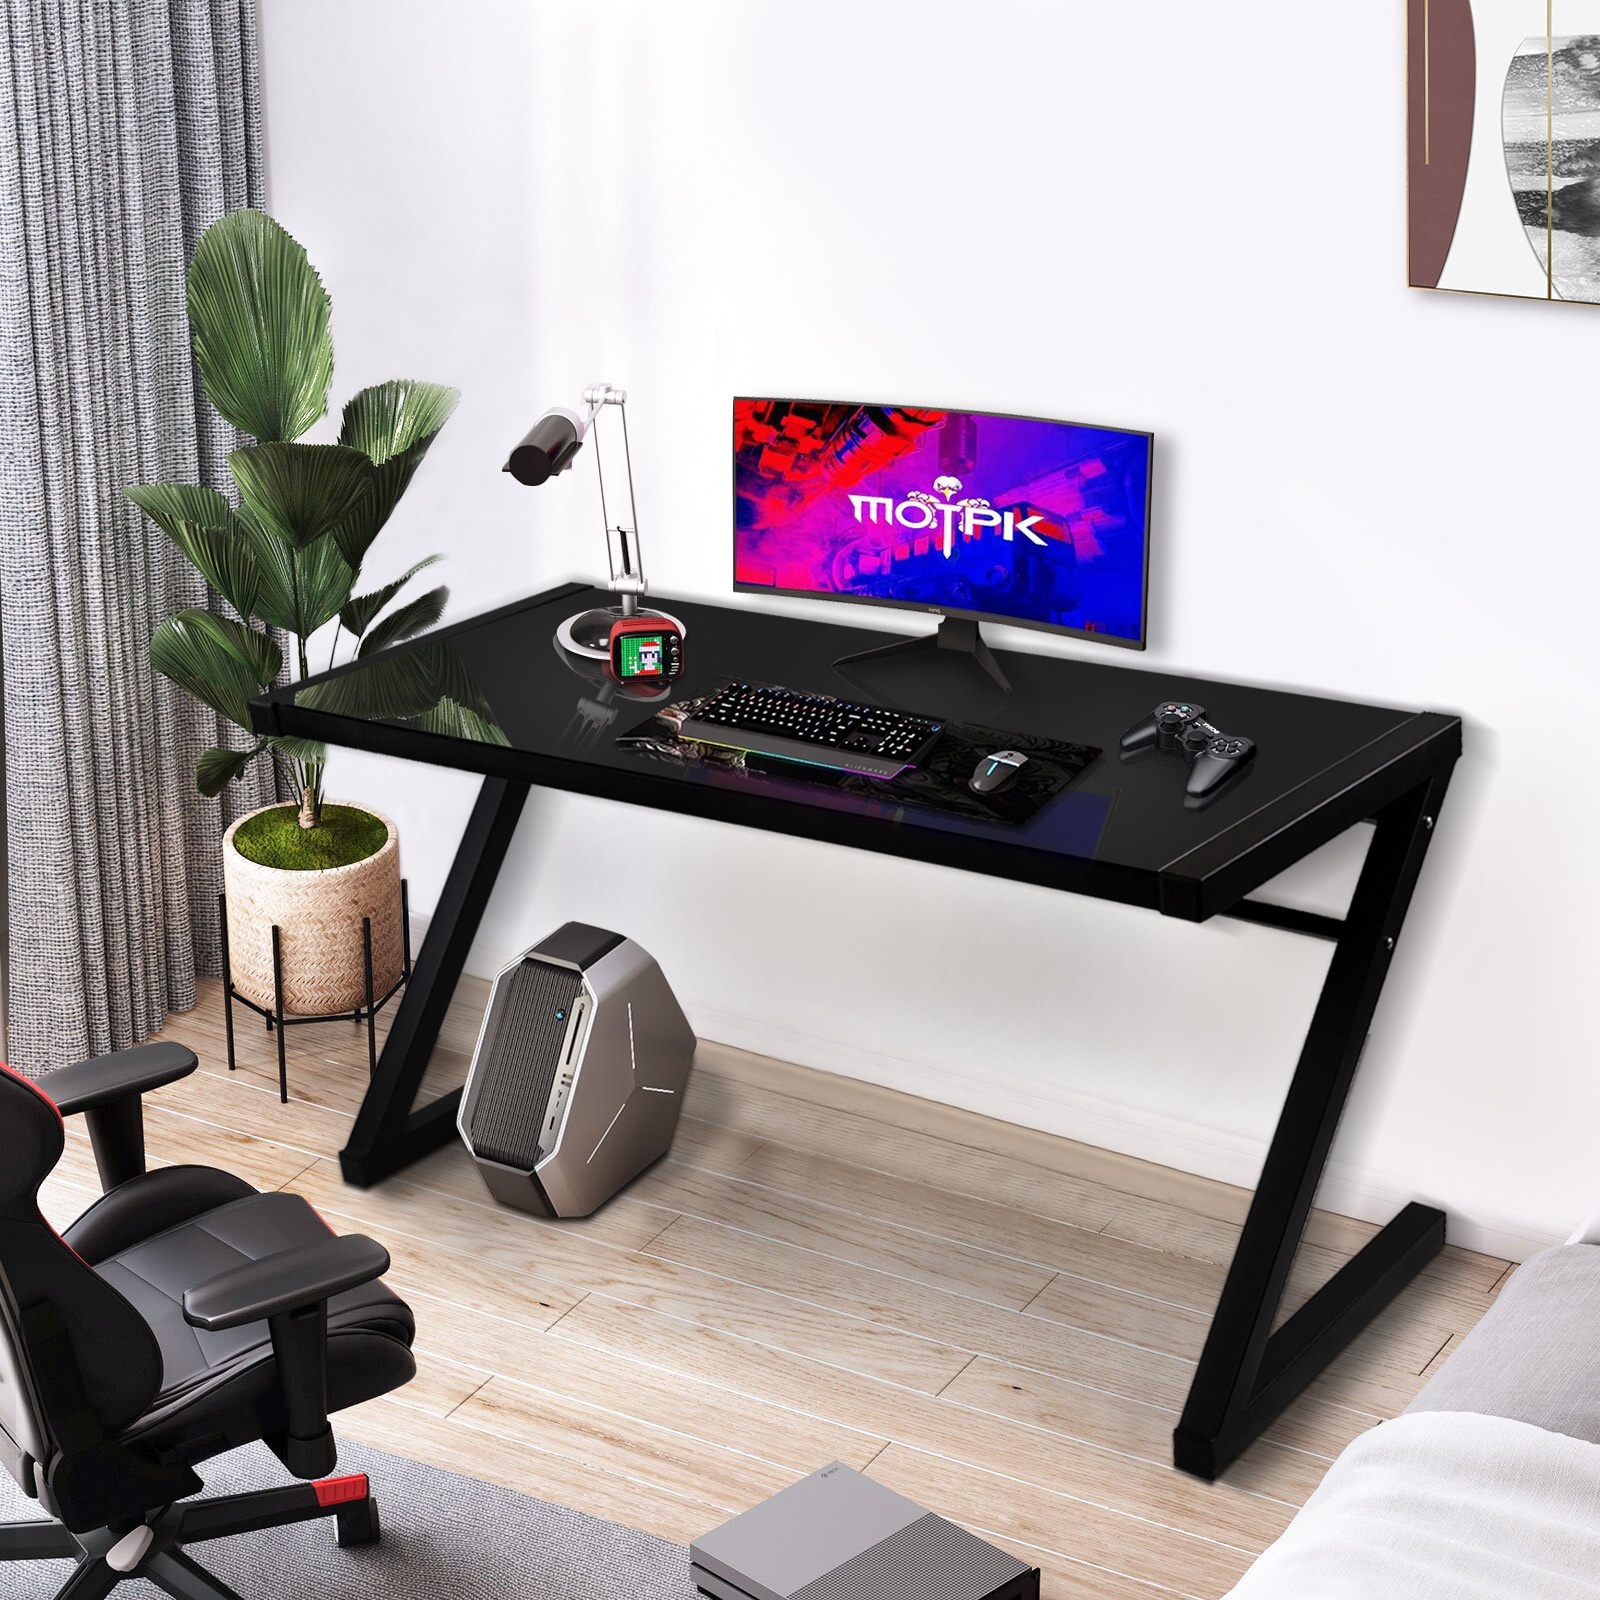 https://ak1.ostkcdn.com/images/products/is/images/direct/4a0fe6703cc819b634afda89a56f9437a995d83c/Hello-Laura-Professional-Z-Leg-Tempered-Glass-Gaming-and-Study-Desk-with-USB-Cable.jpg